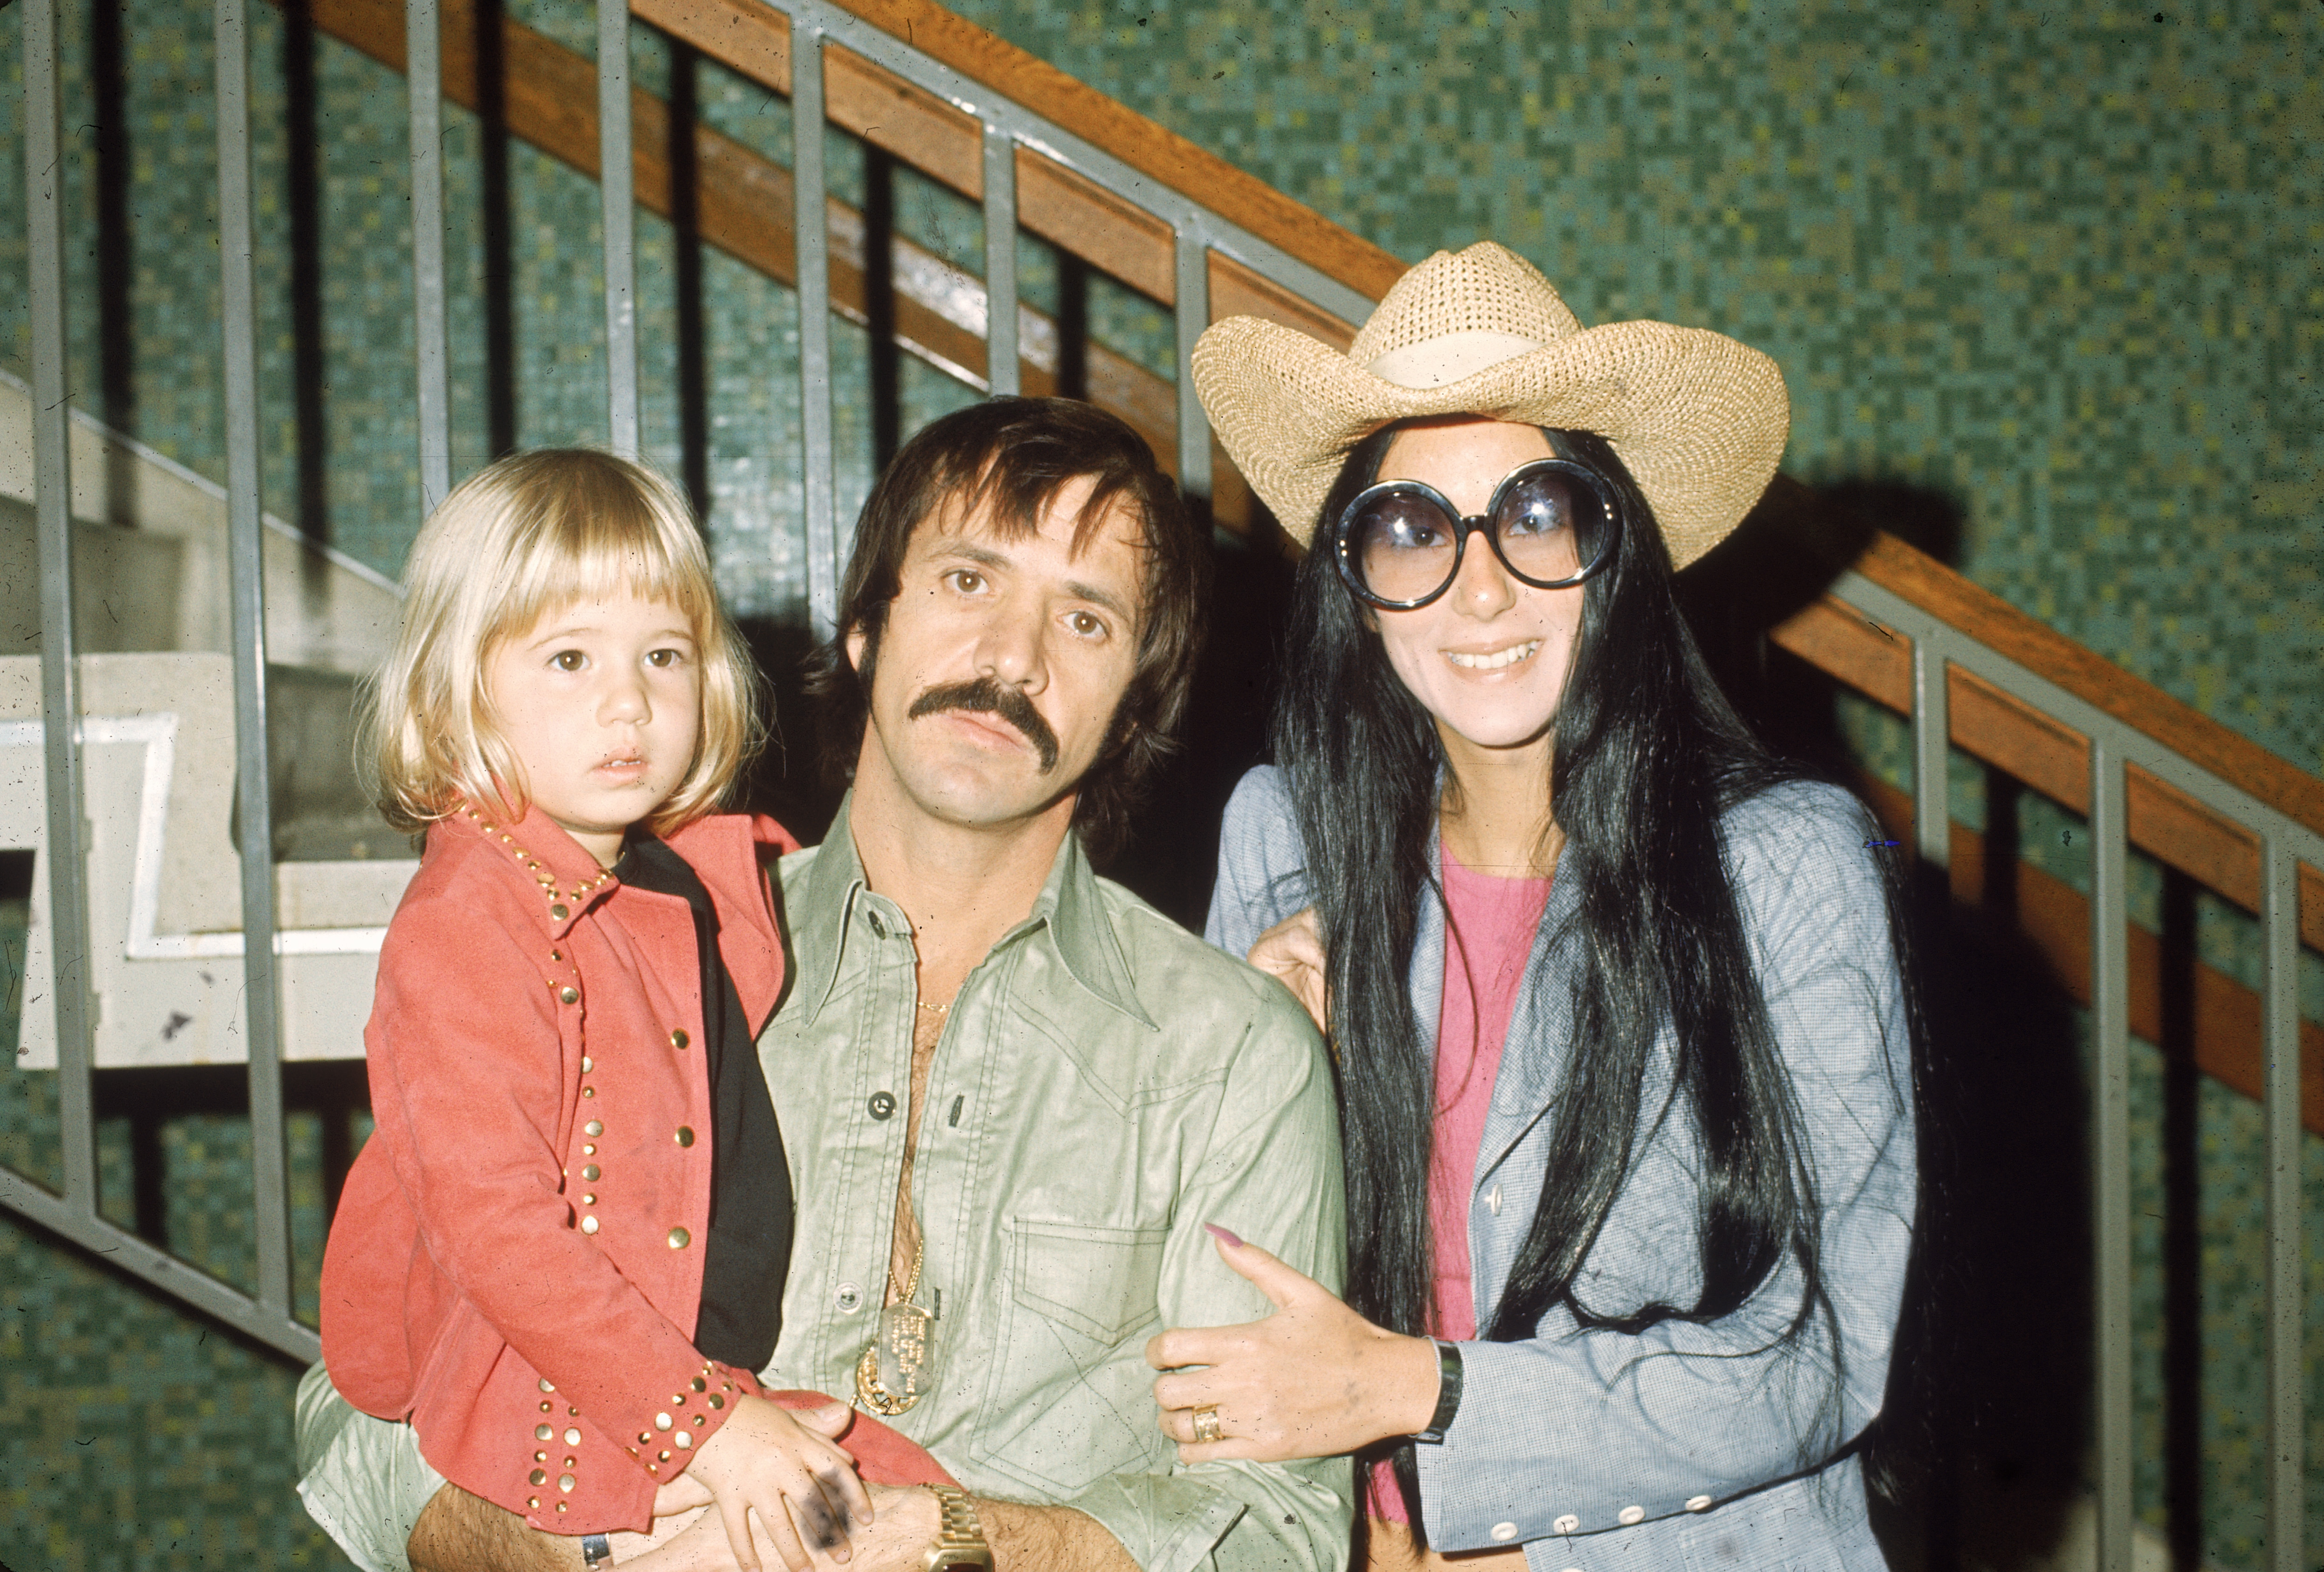 Sonny and Cher Bono pose with Chastity Bono in front of a staircase, on March 1, 1973.